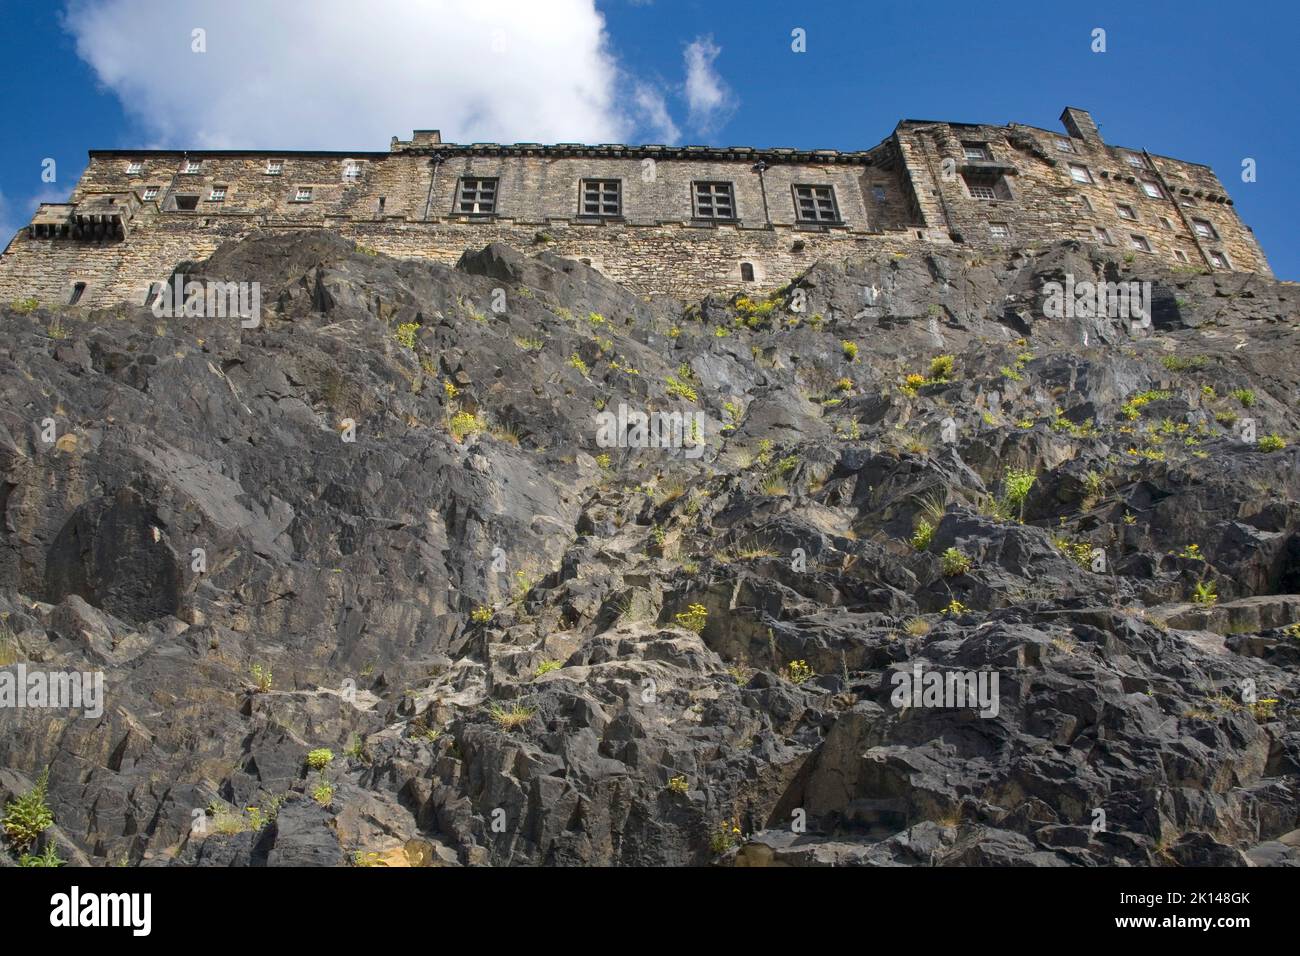 edinburgh castle perched high above the city on a granite cliff Stock Photo